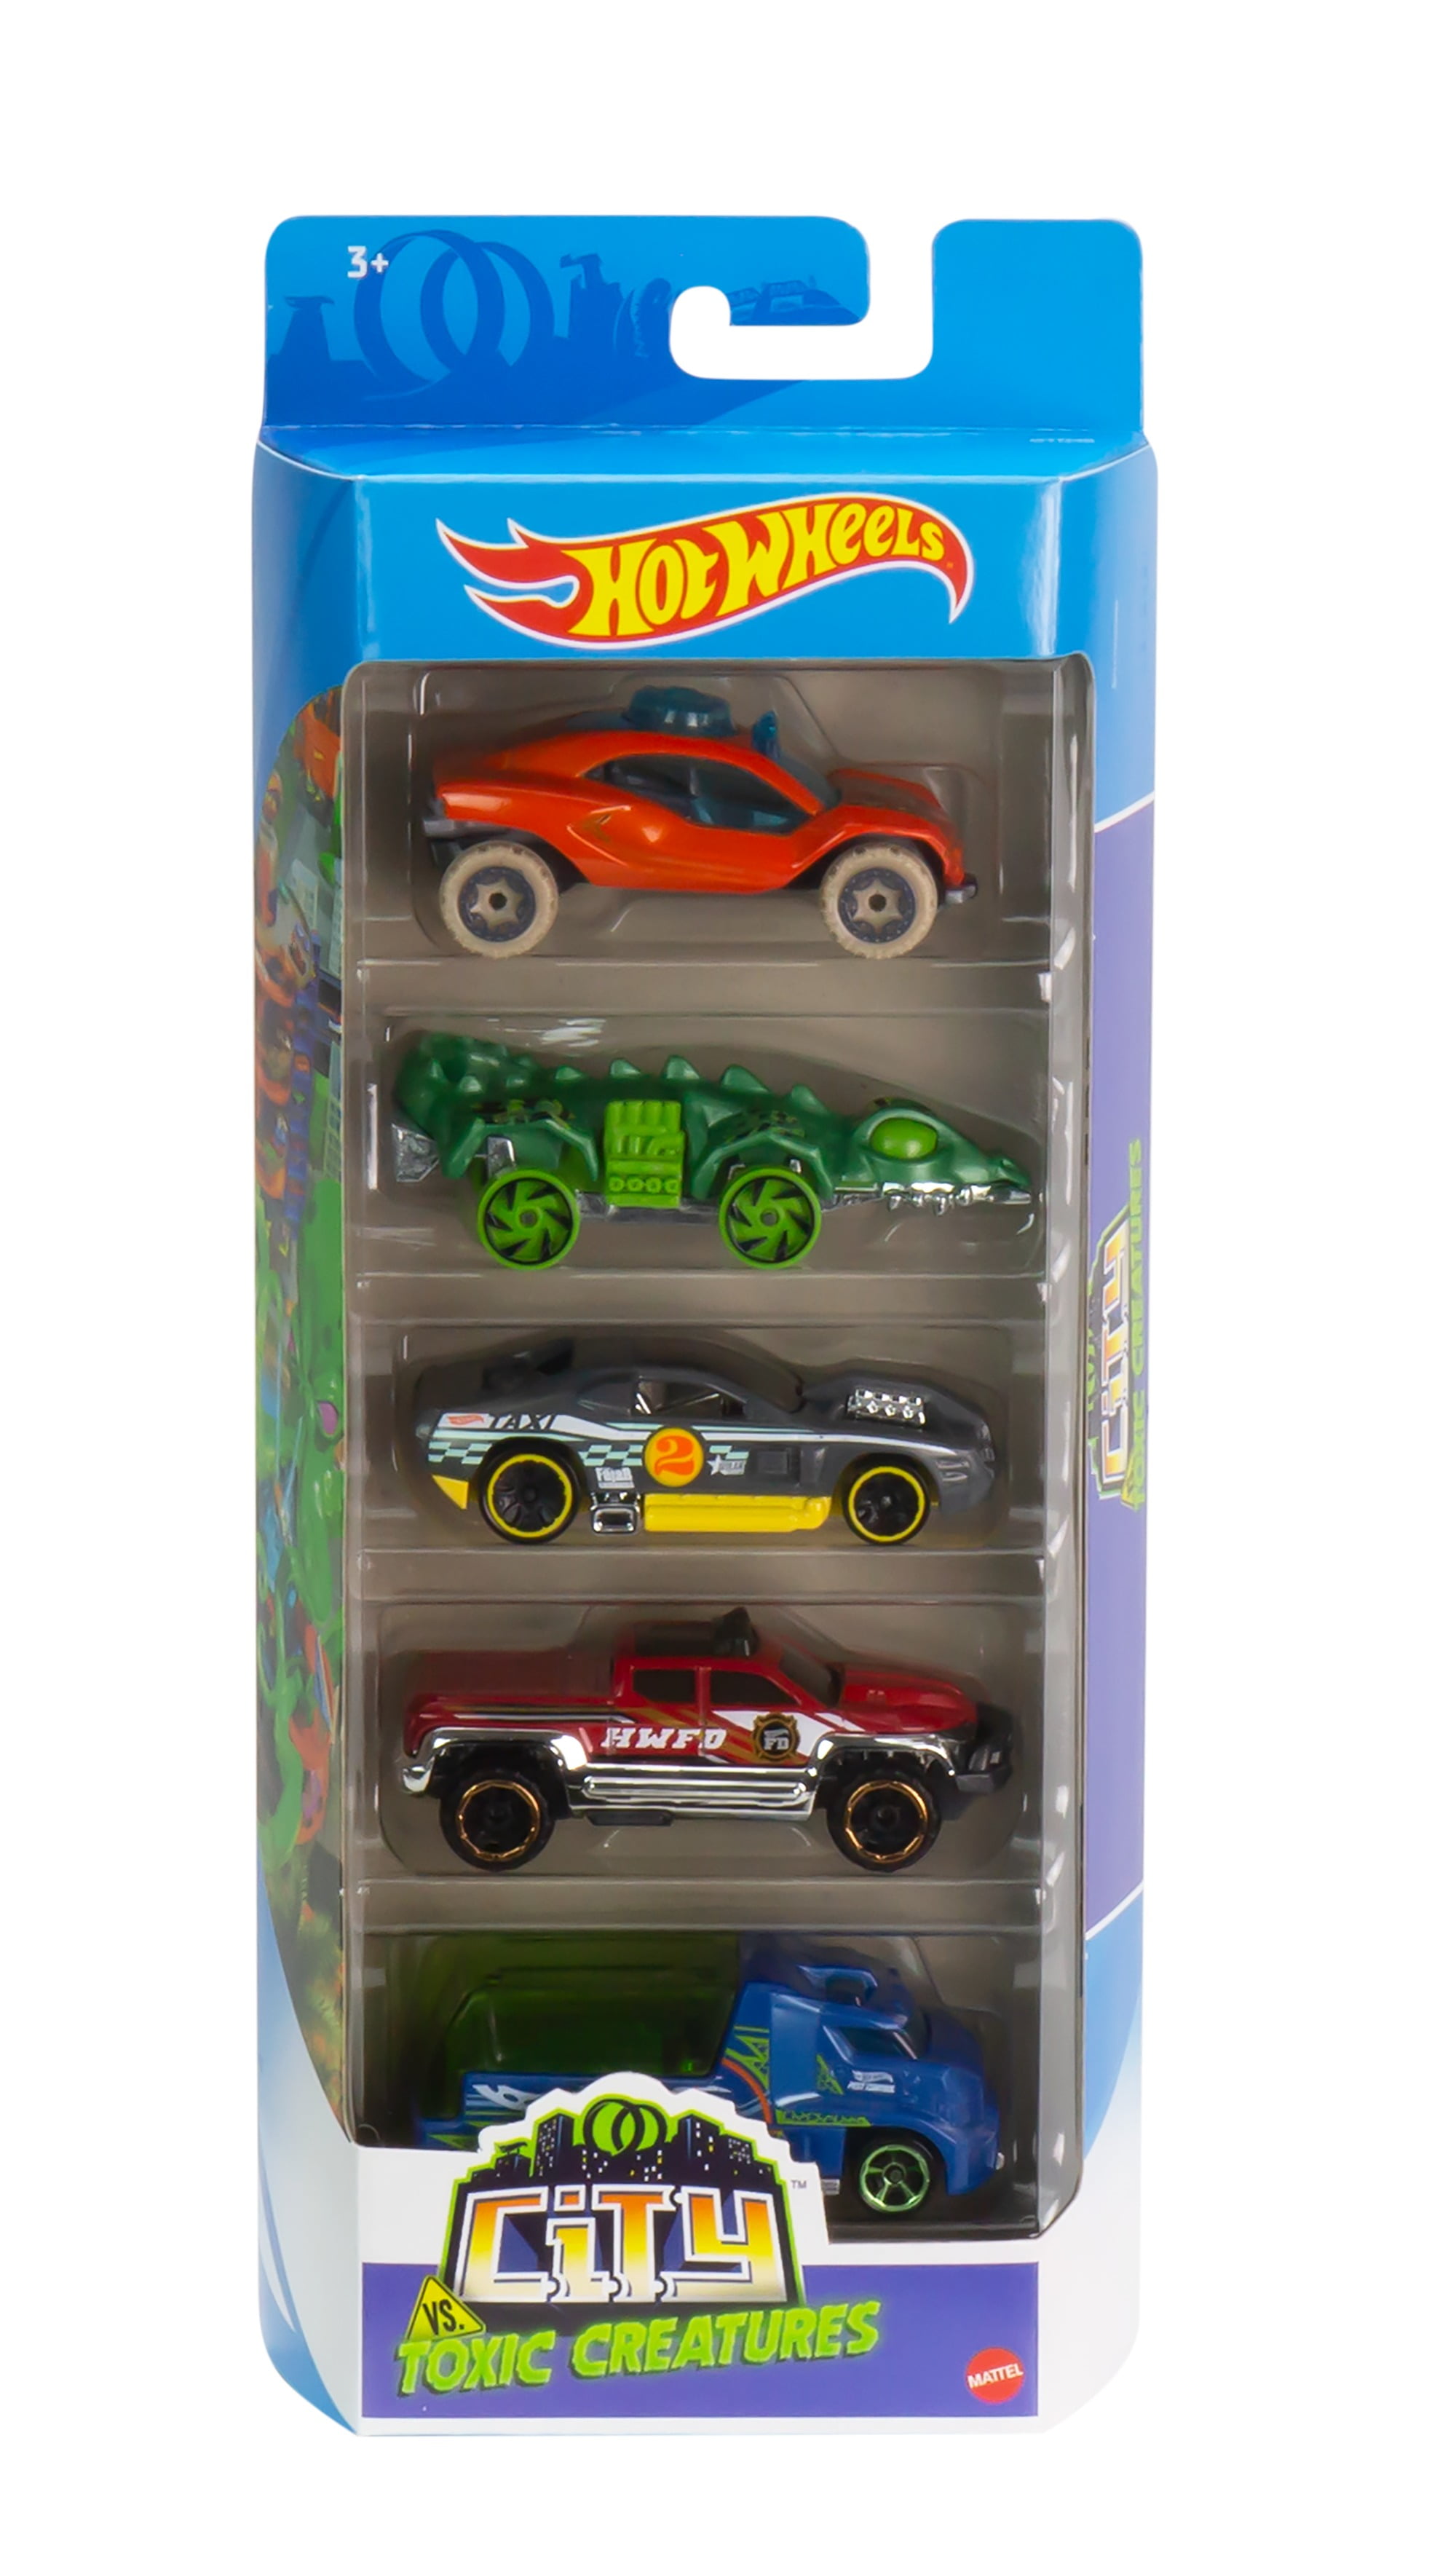 Hot Wheels 5 Cars Diecast Vehicle Pack Limited Editions Mattel New Genuine 3+ 